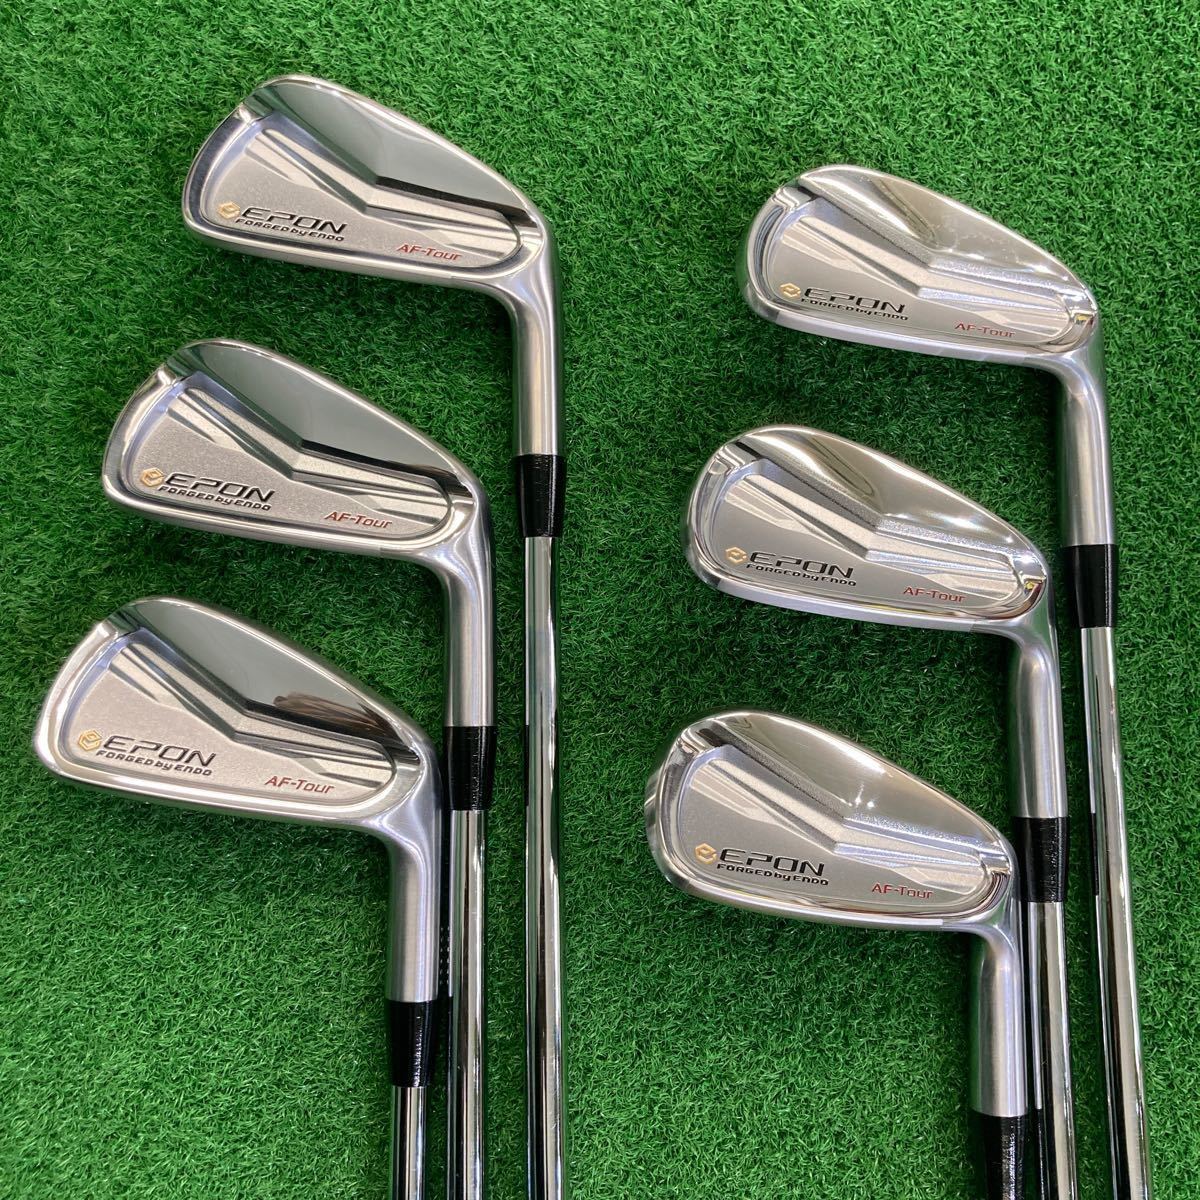 EPONGOLFエポンゴルフ AF TOUR CB2 5-PW 6本セット モーダス120/S中古美品_画像2